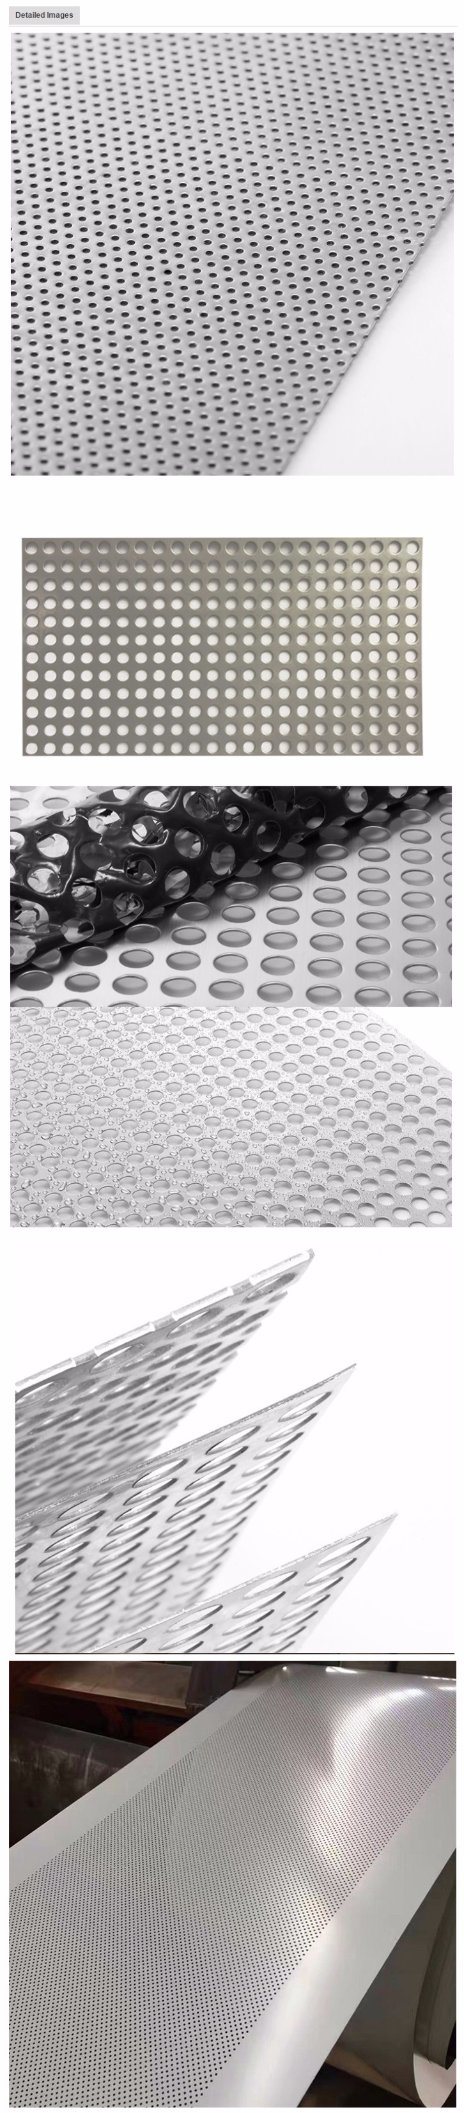 201 Diamond Hole Stainless Steel Perforated Plate